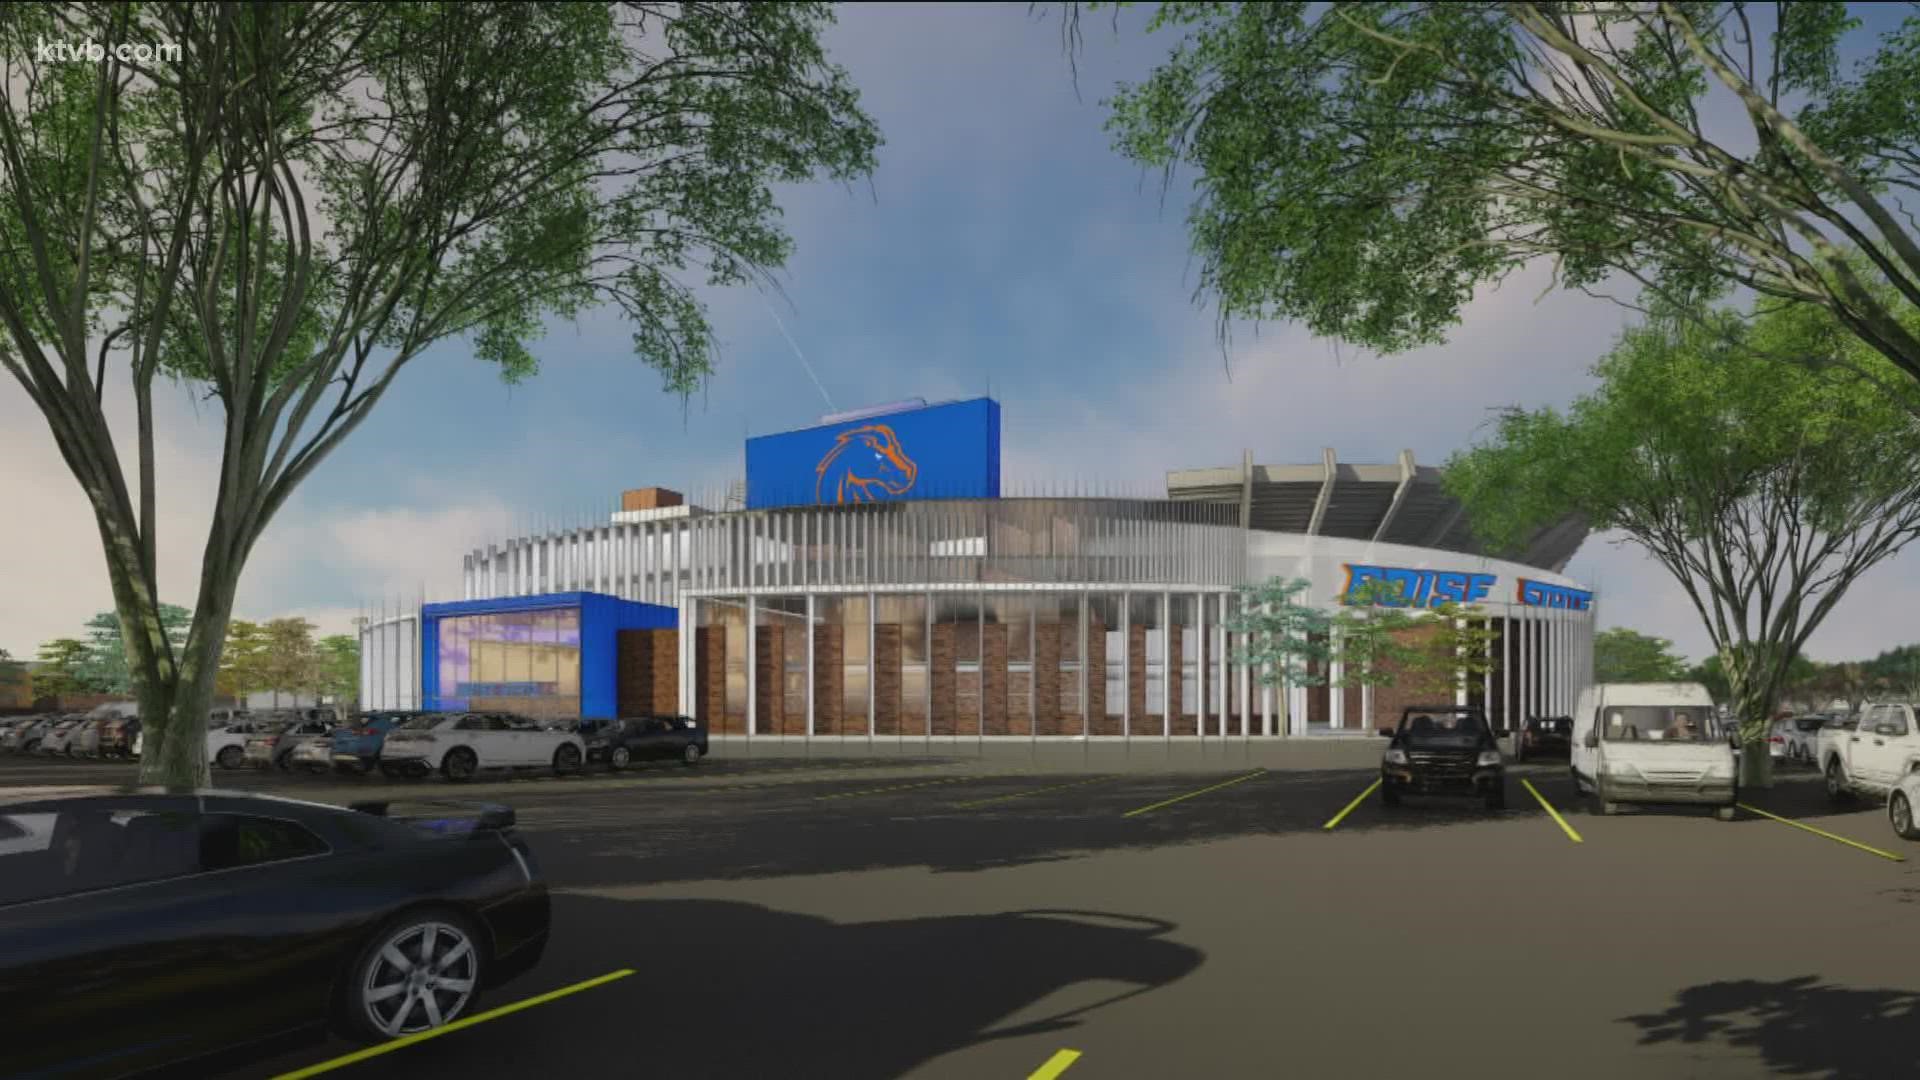 Boise State Athletics and director of athletics Jeramiah Dickey on Thursday announced its vision and 12 priorities to create an Athletics Master Village on campus.